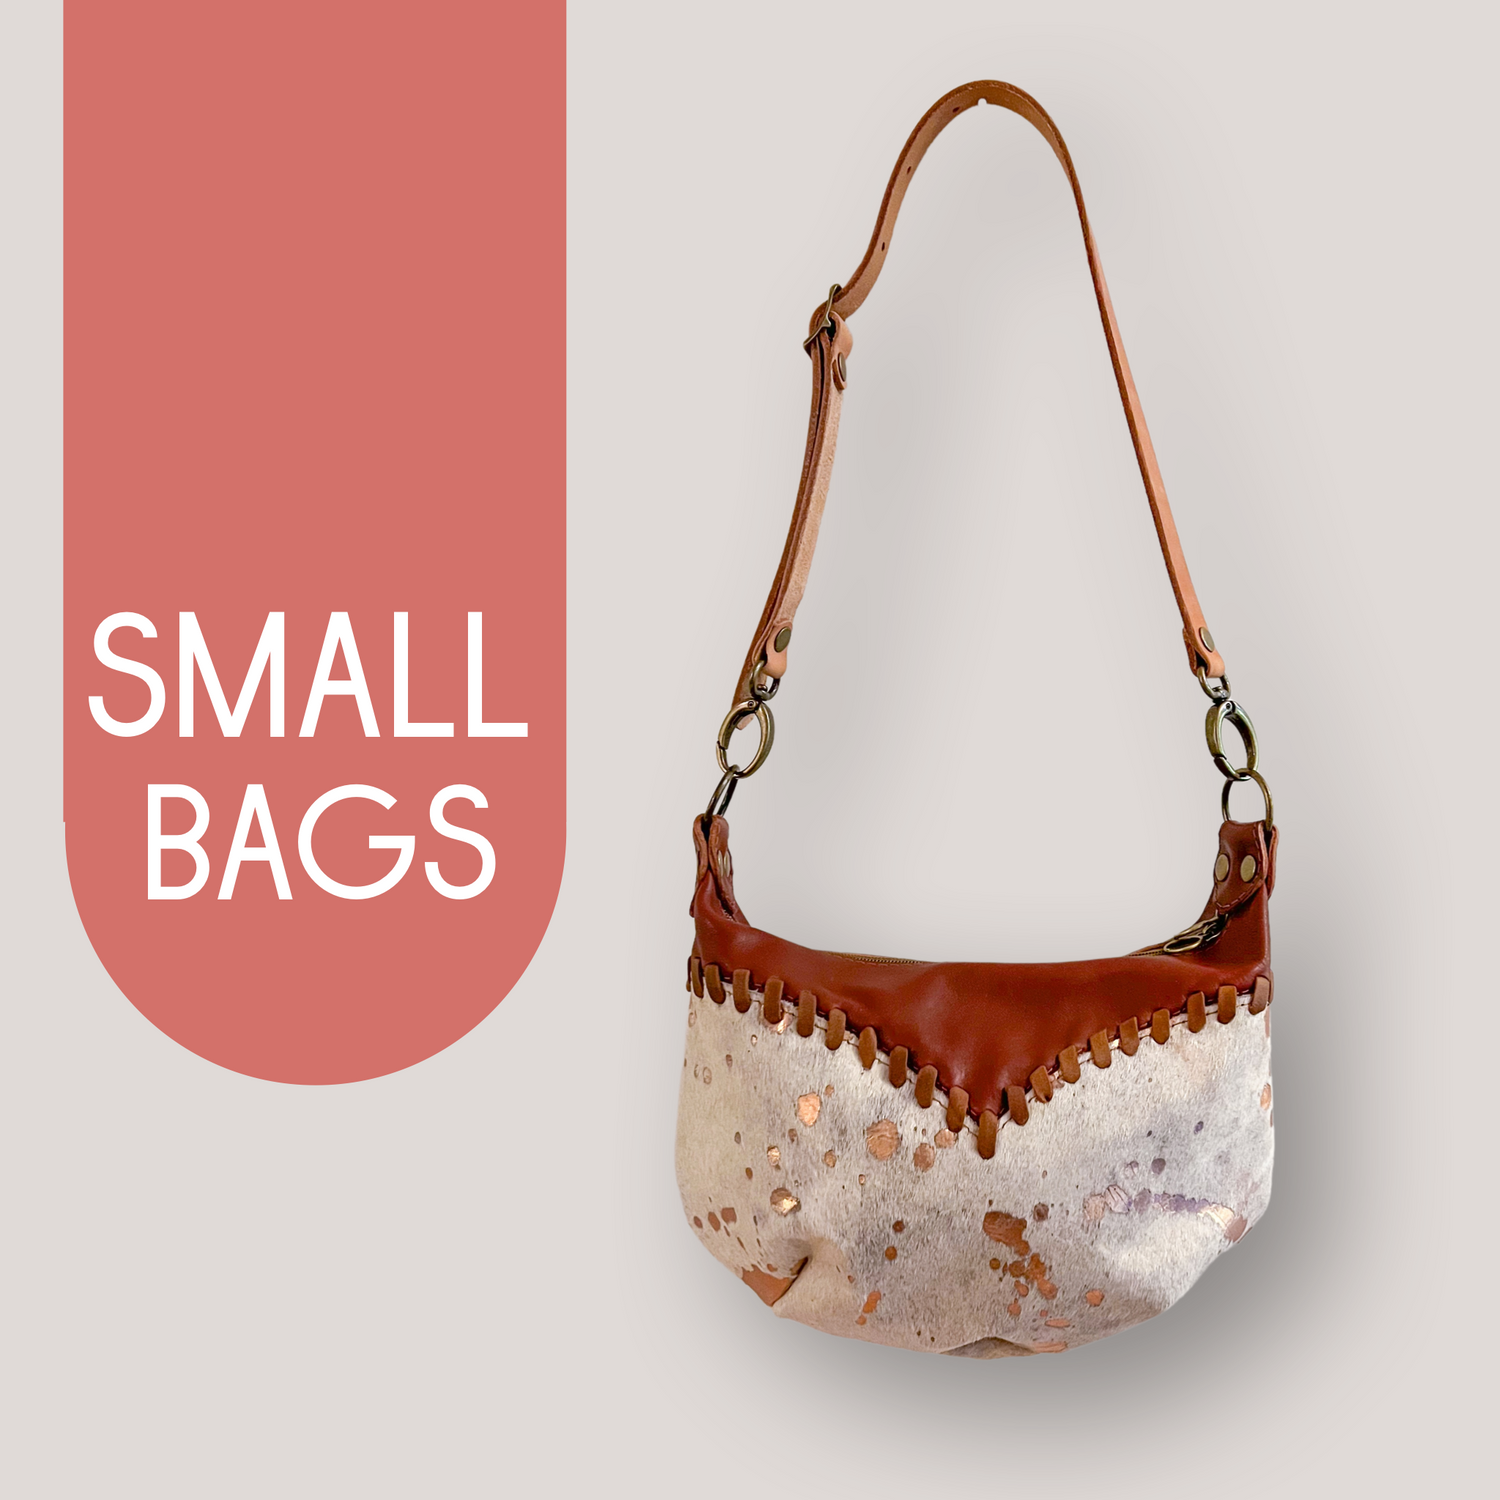 Small Bags